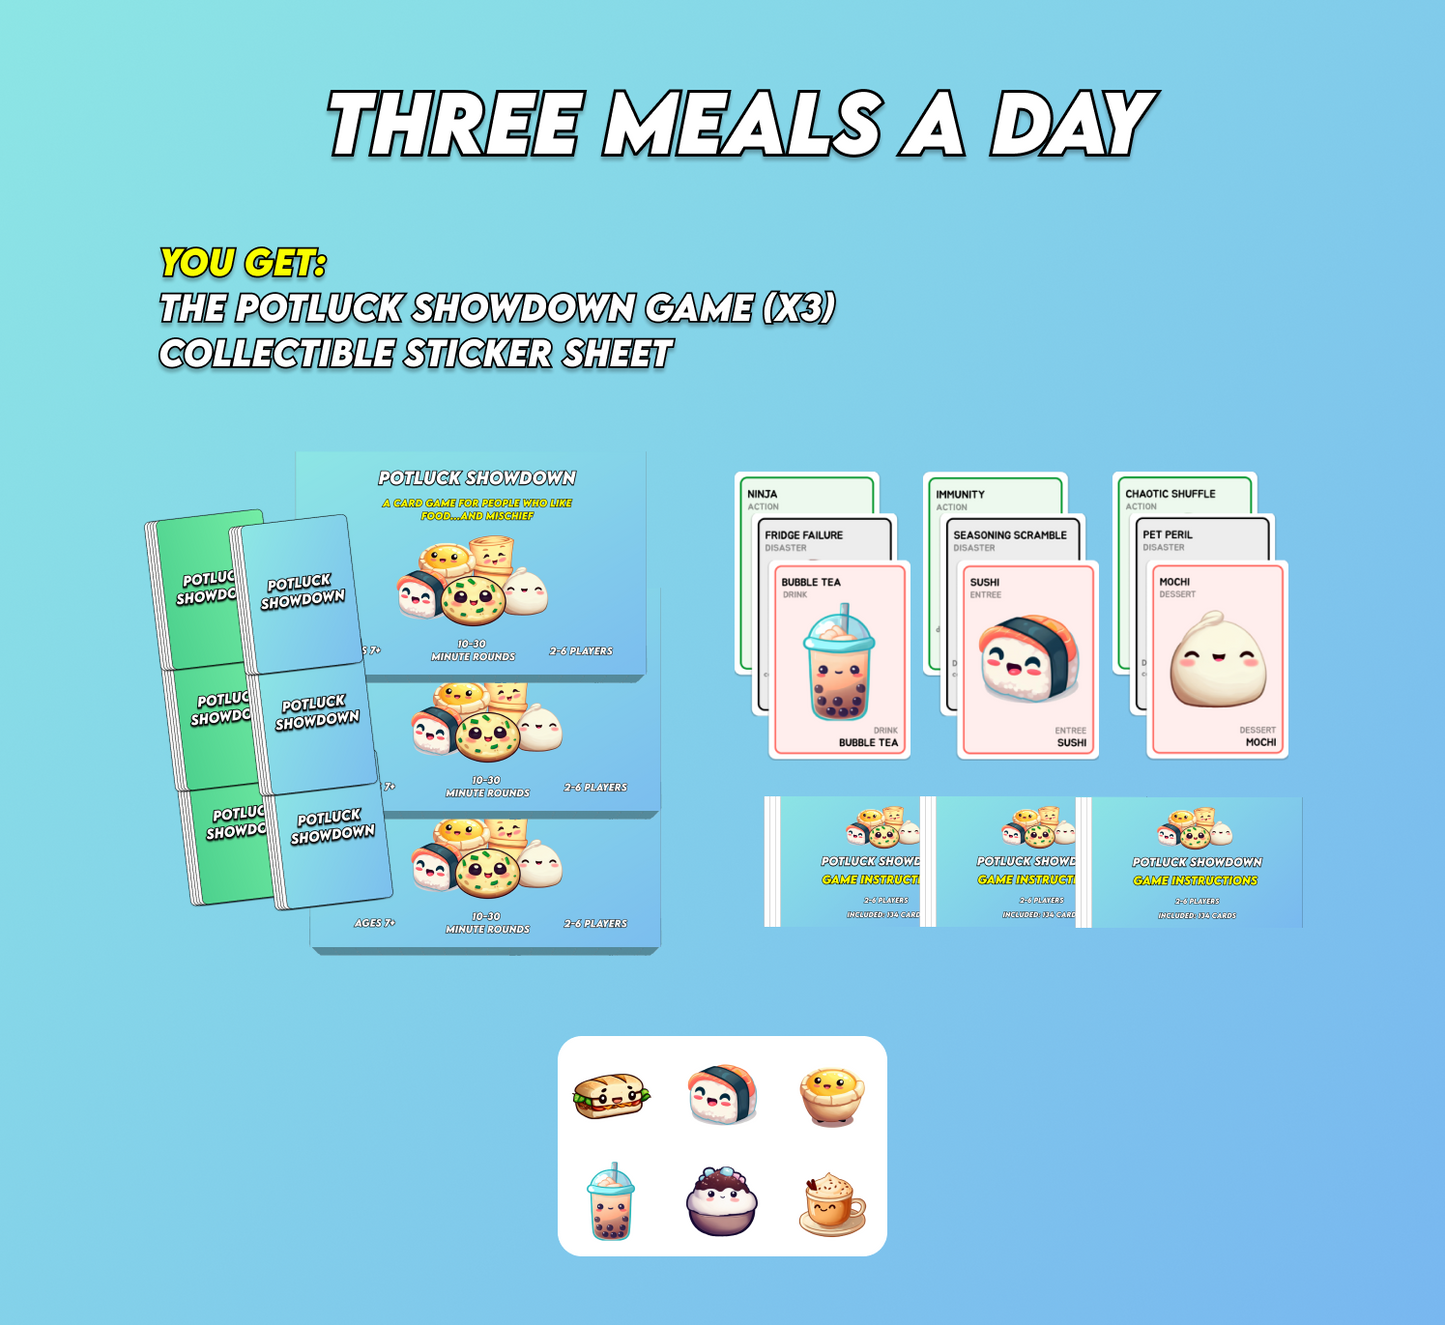 Three Meals A Day (3 Game Units + Sticker Sheet) 15% OFF